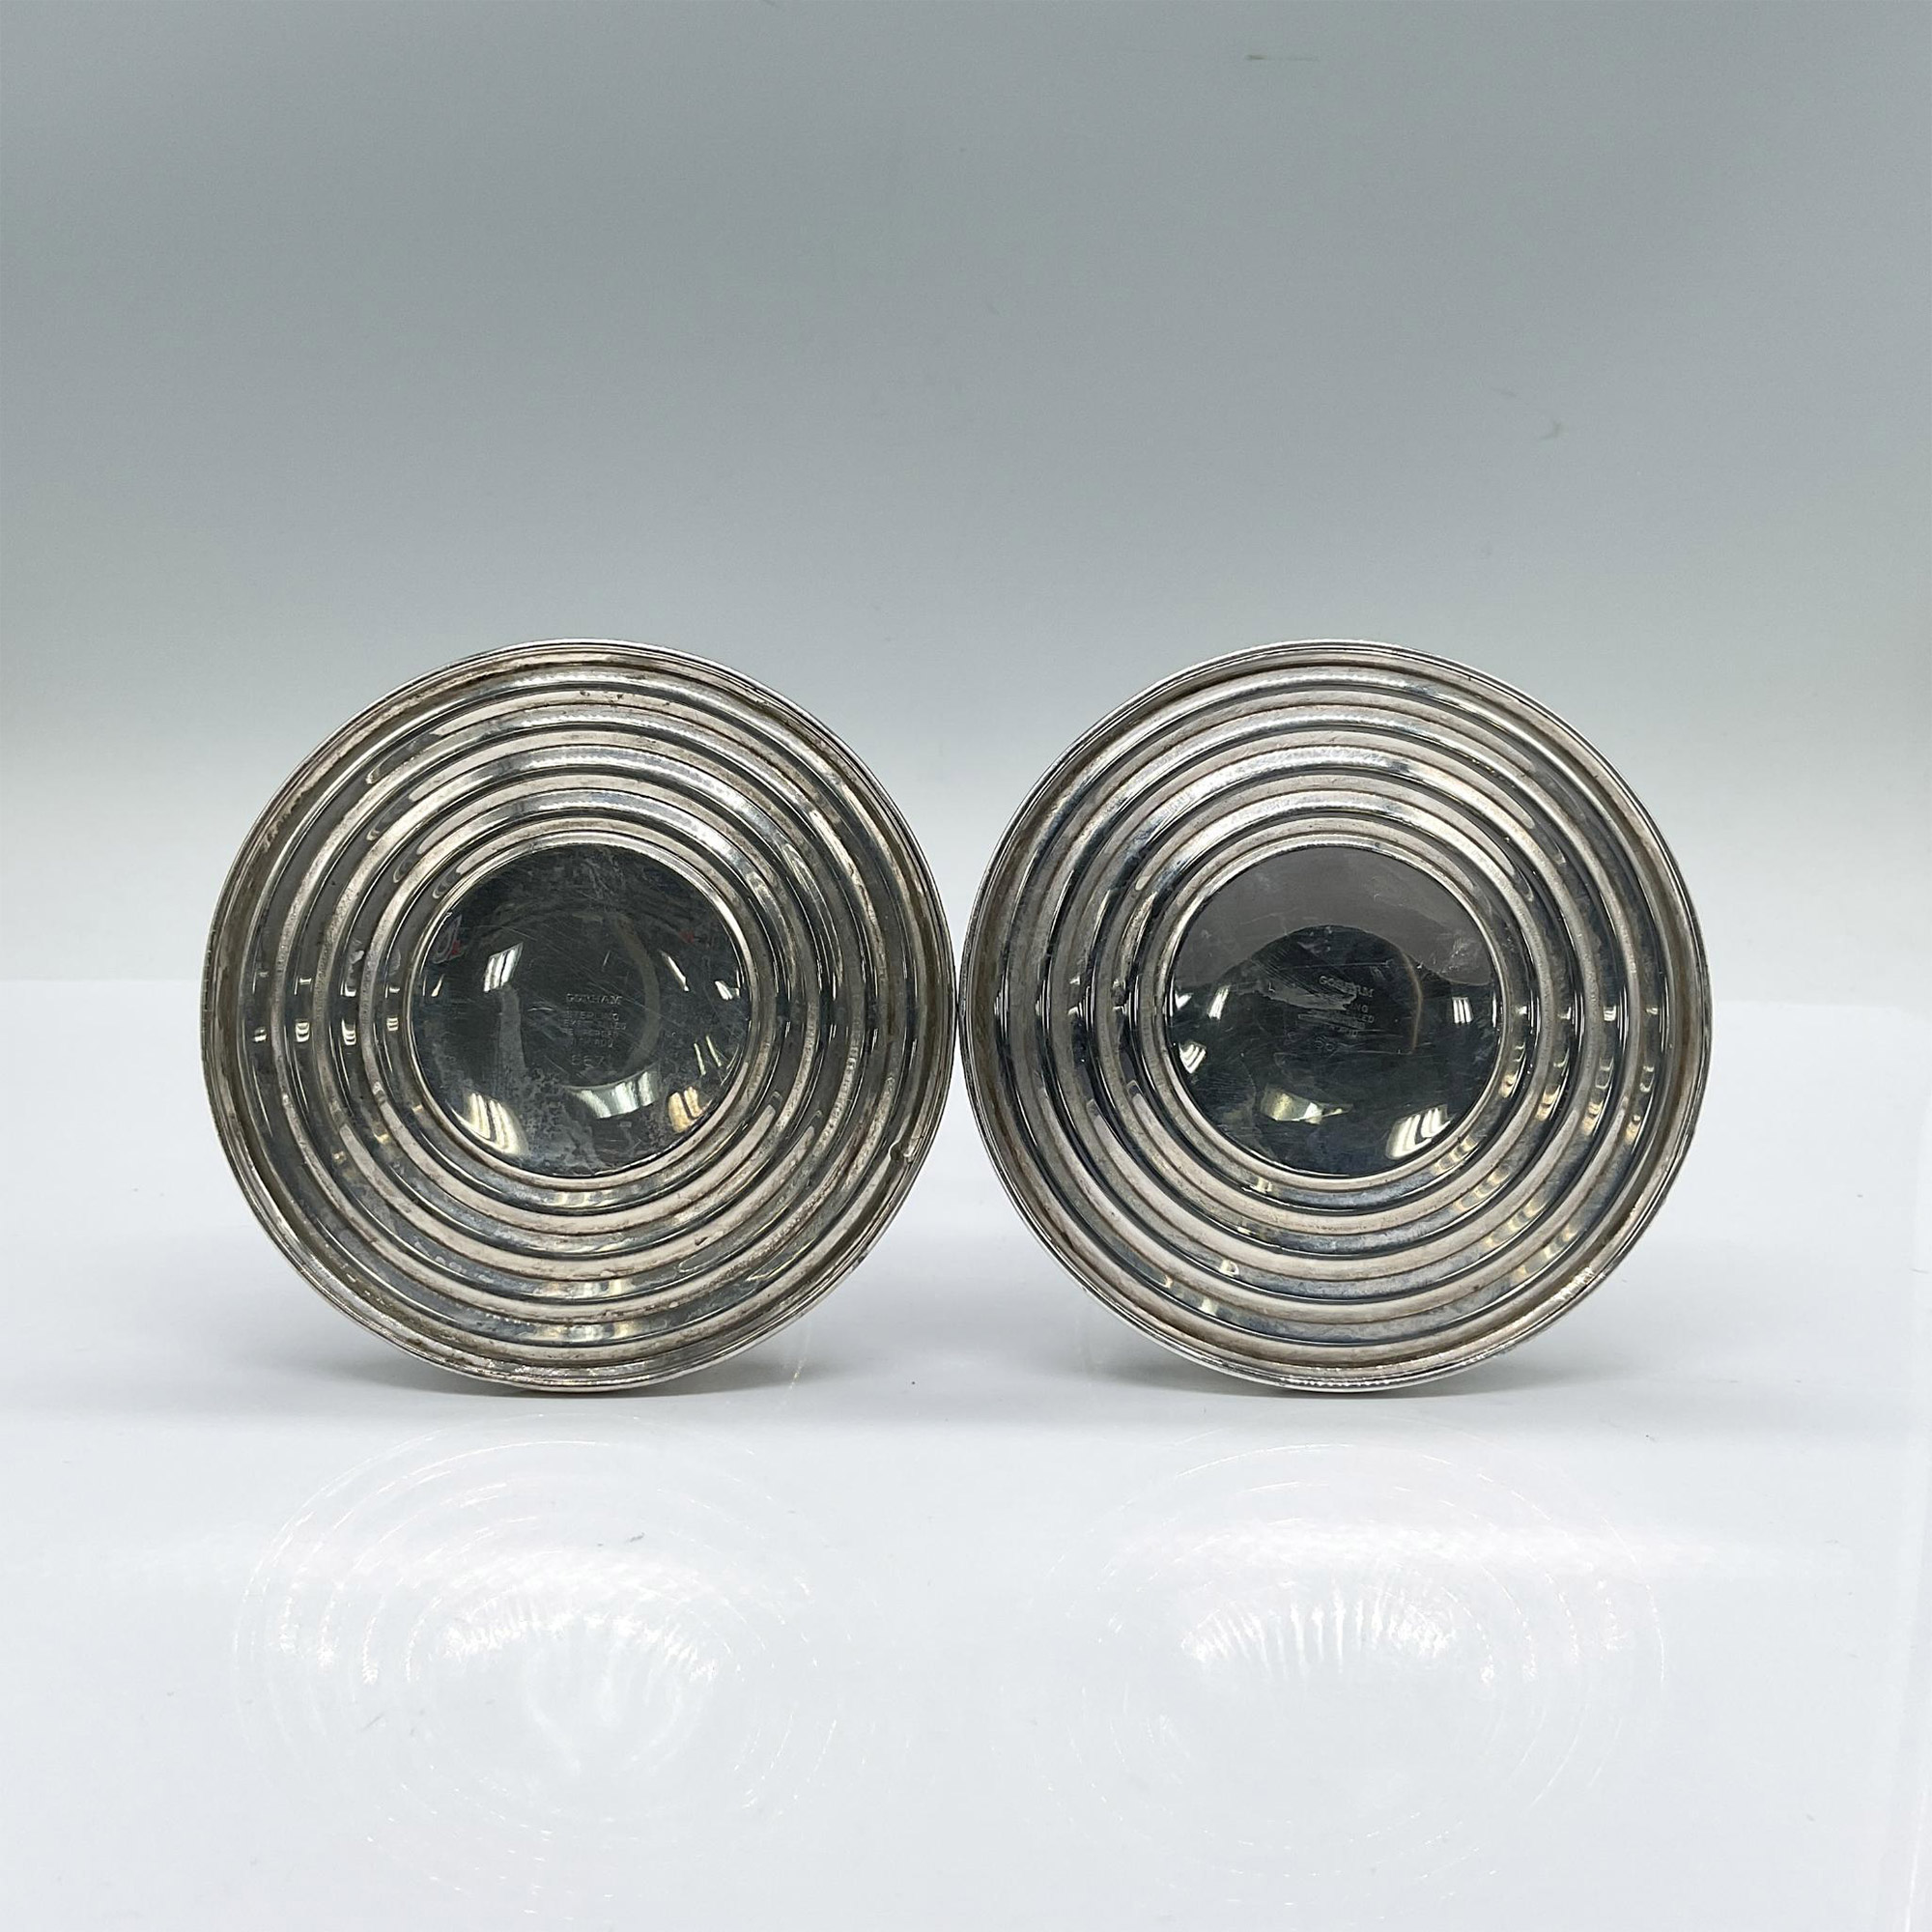 Pair of Gorham Weighted Sterling Siiver Candlestick Holders - Image 2 of 3